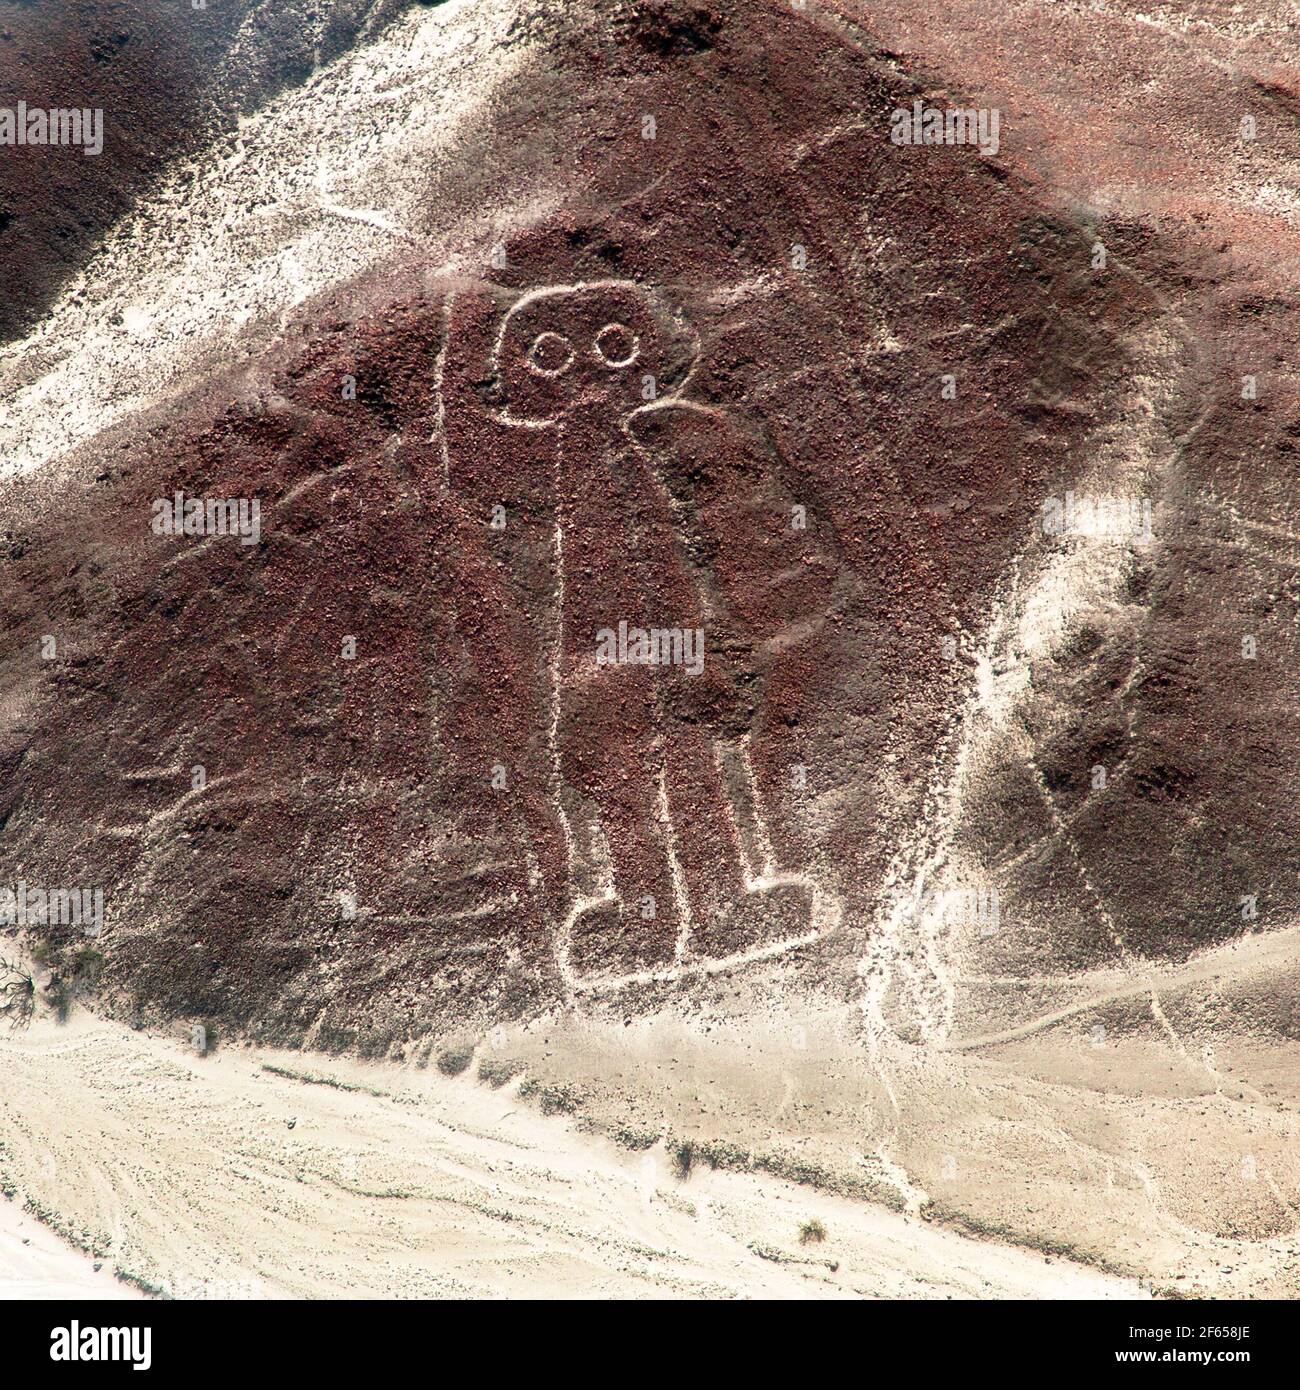 The spaceman or space man, Nazca or Nasca mysterious lines and geoglyphs aerial view, landmark in Peru Stock Photo